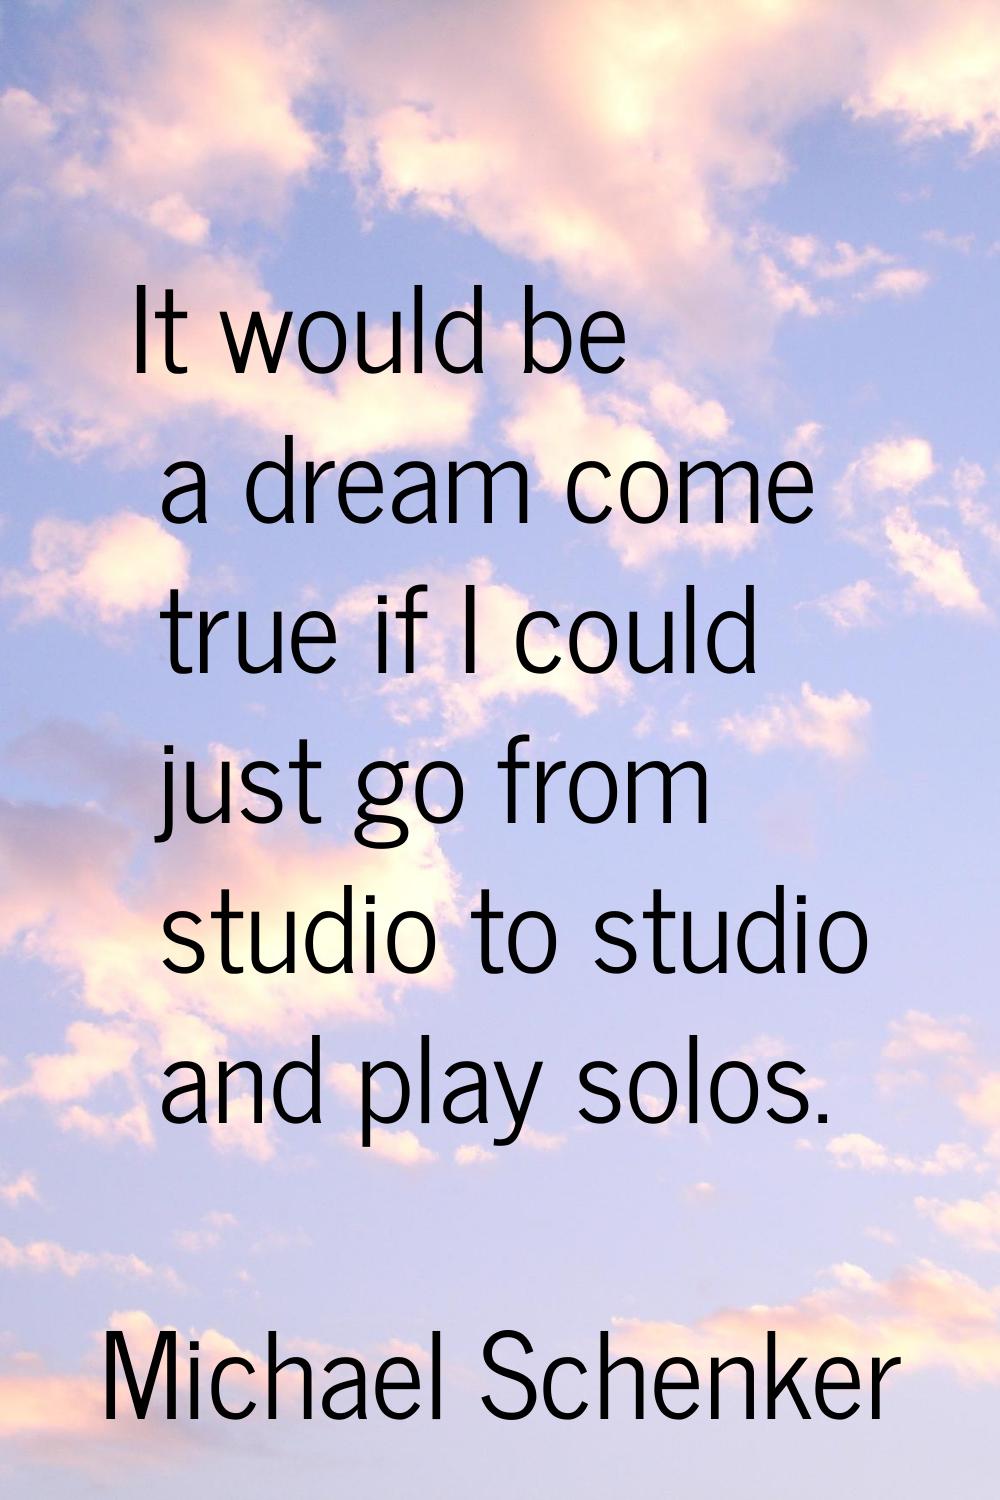 It would be a dream come true if I could just go from studio to studio and play solos.